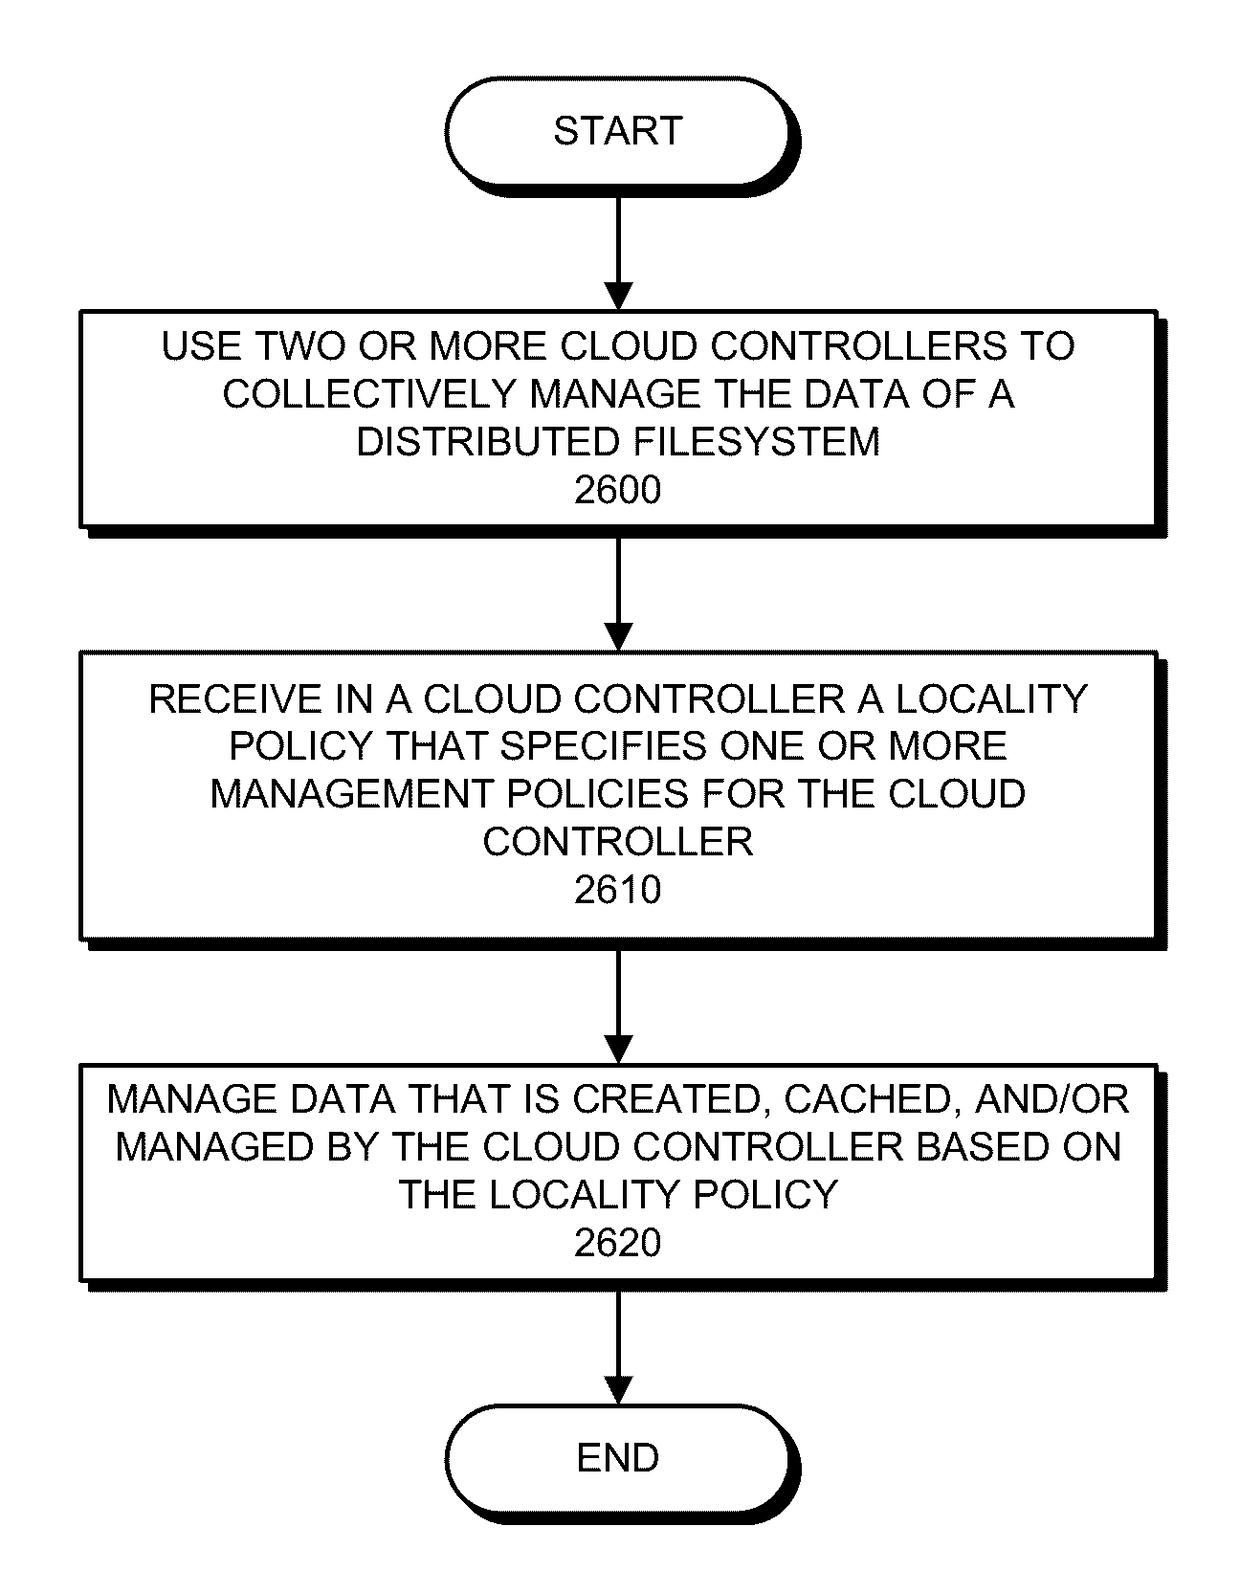 Customizing data management for a distributed filesystem